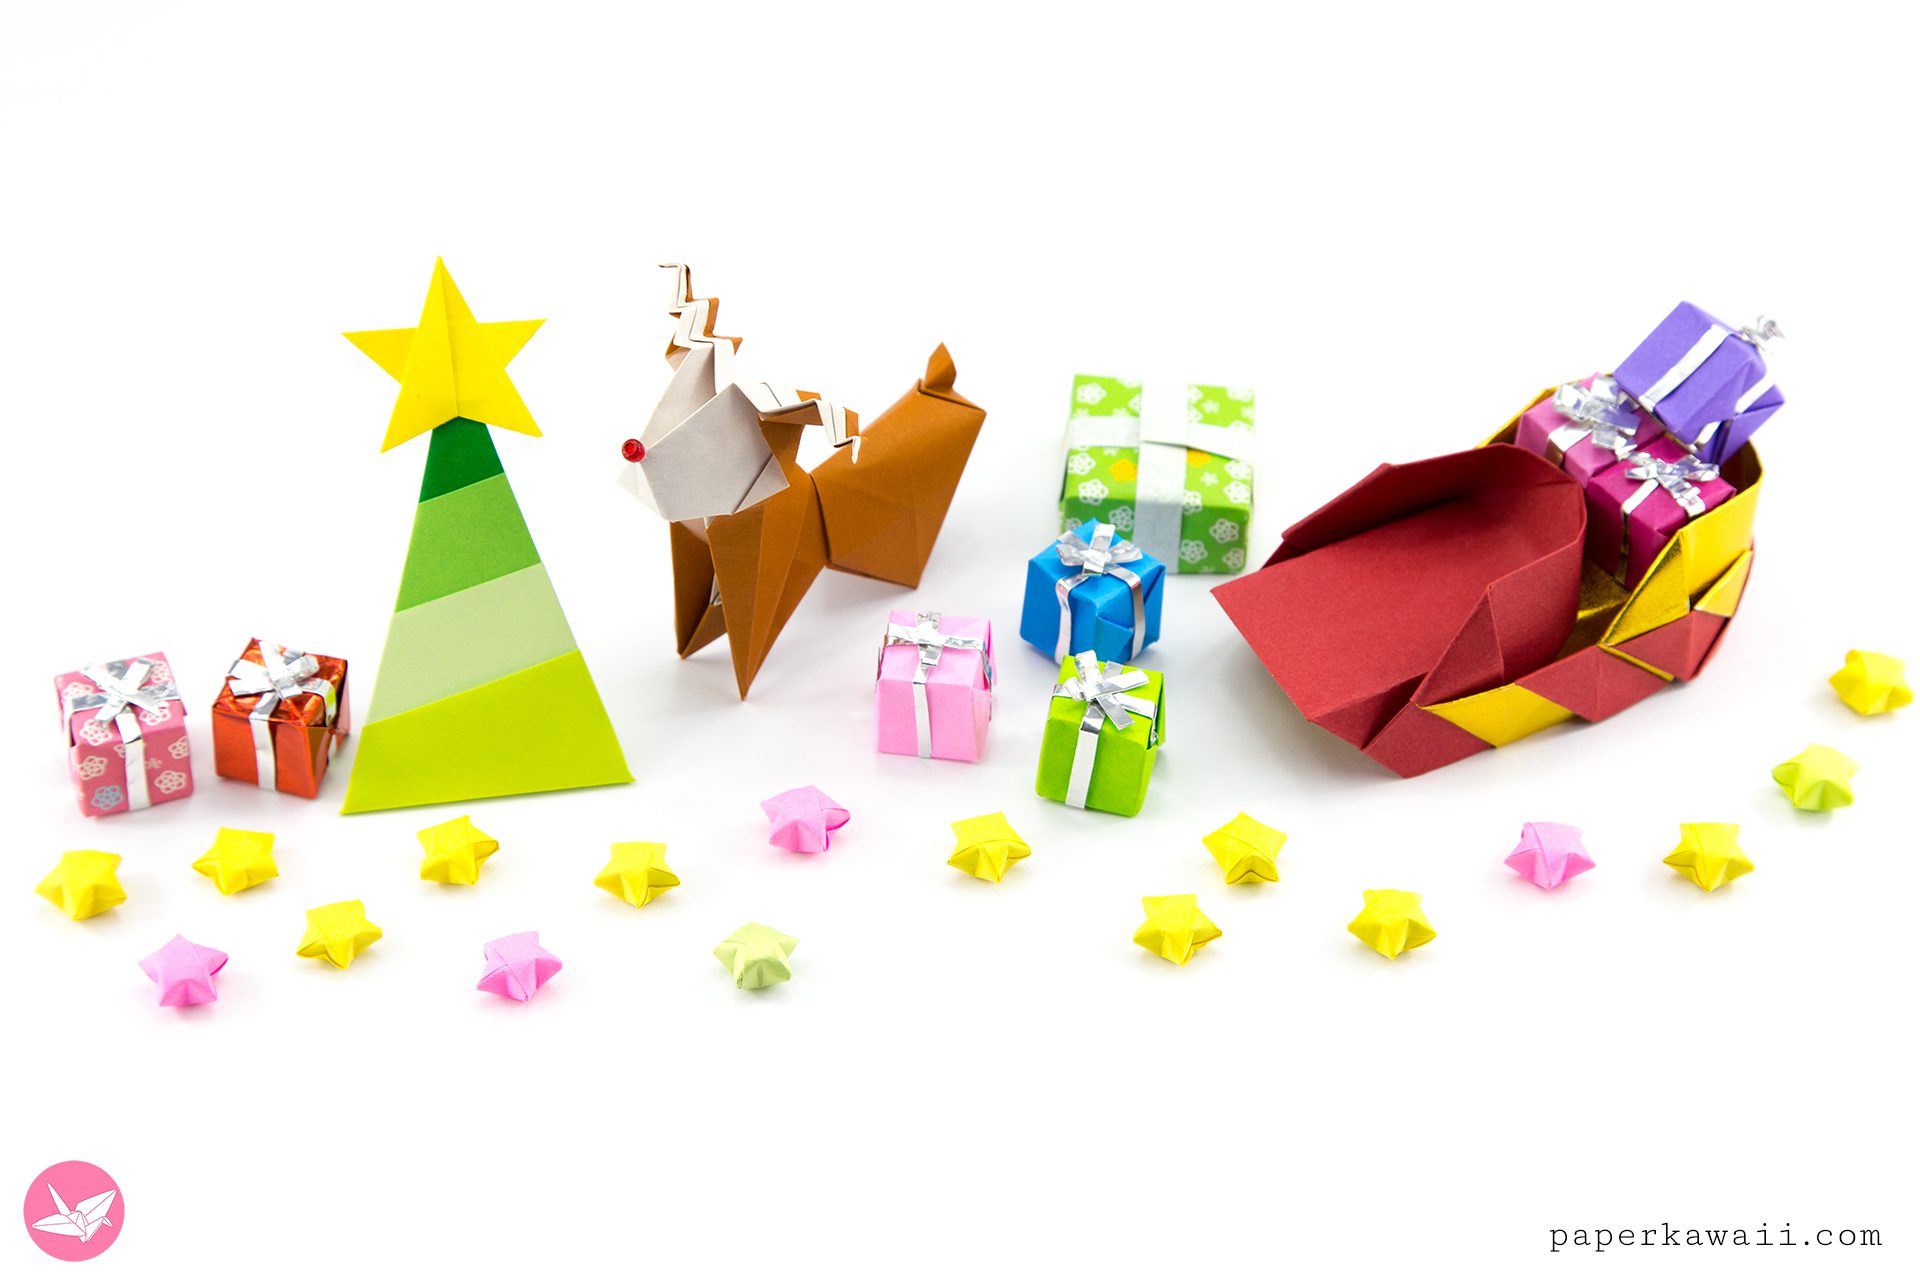 Simple Origami Christmas Tree With More Origami!